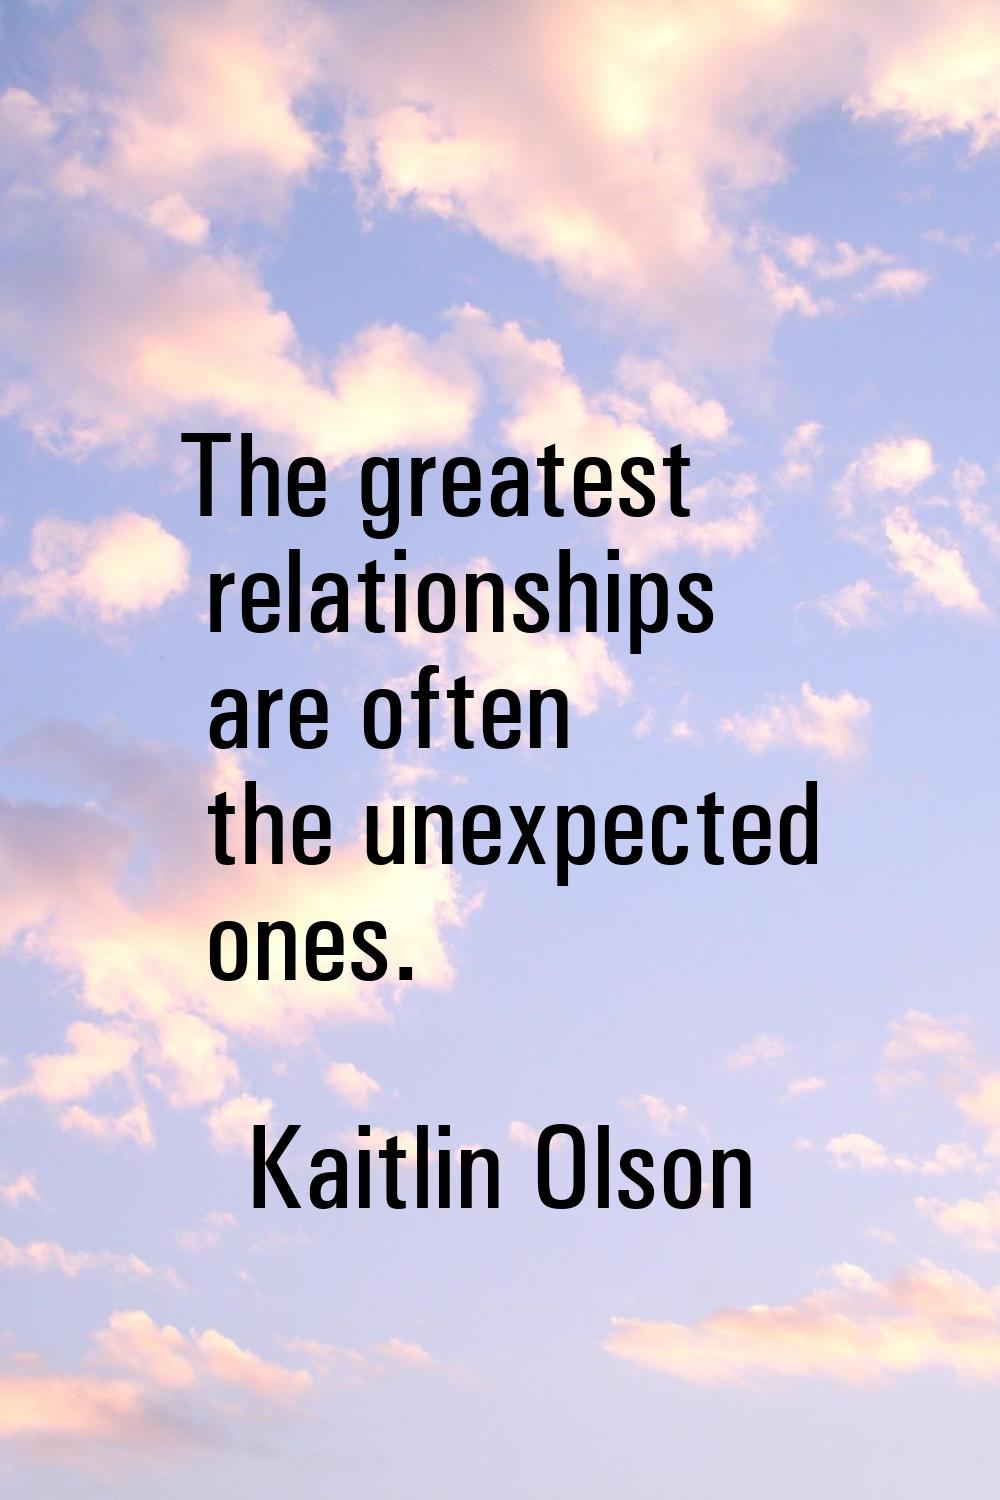 The greatest relationships are often the unexpected ones.